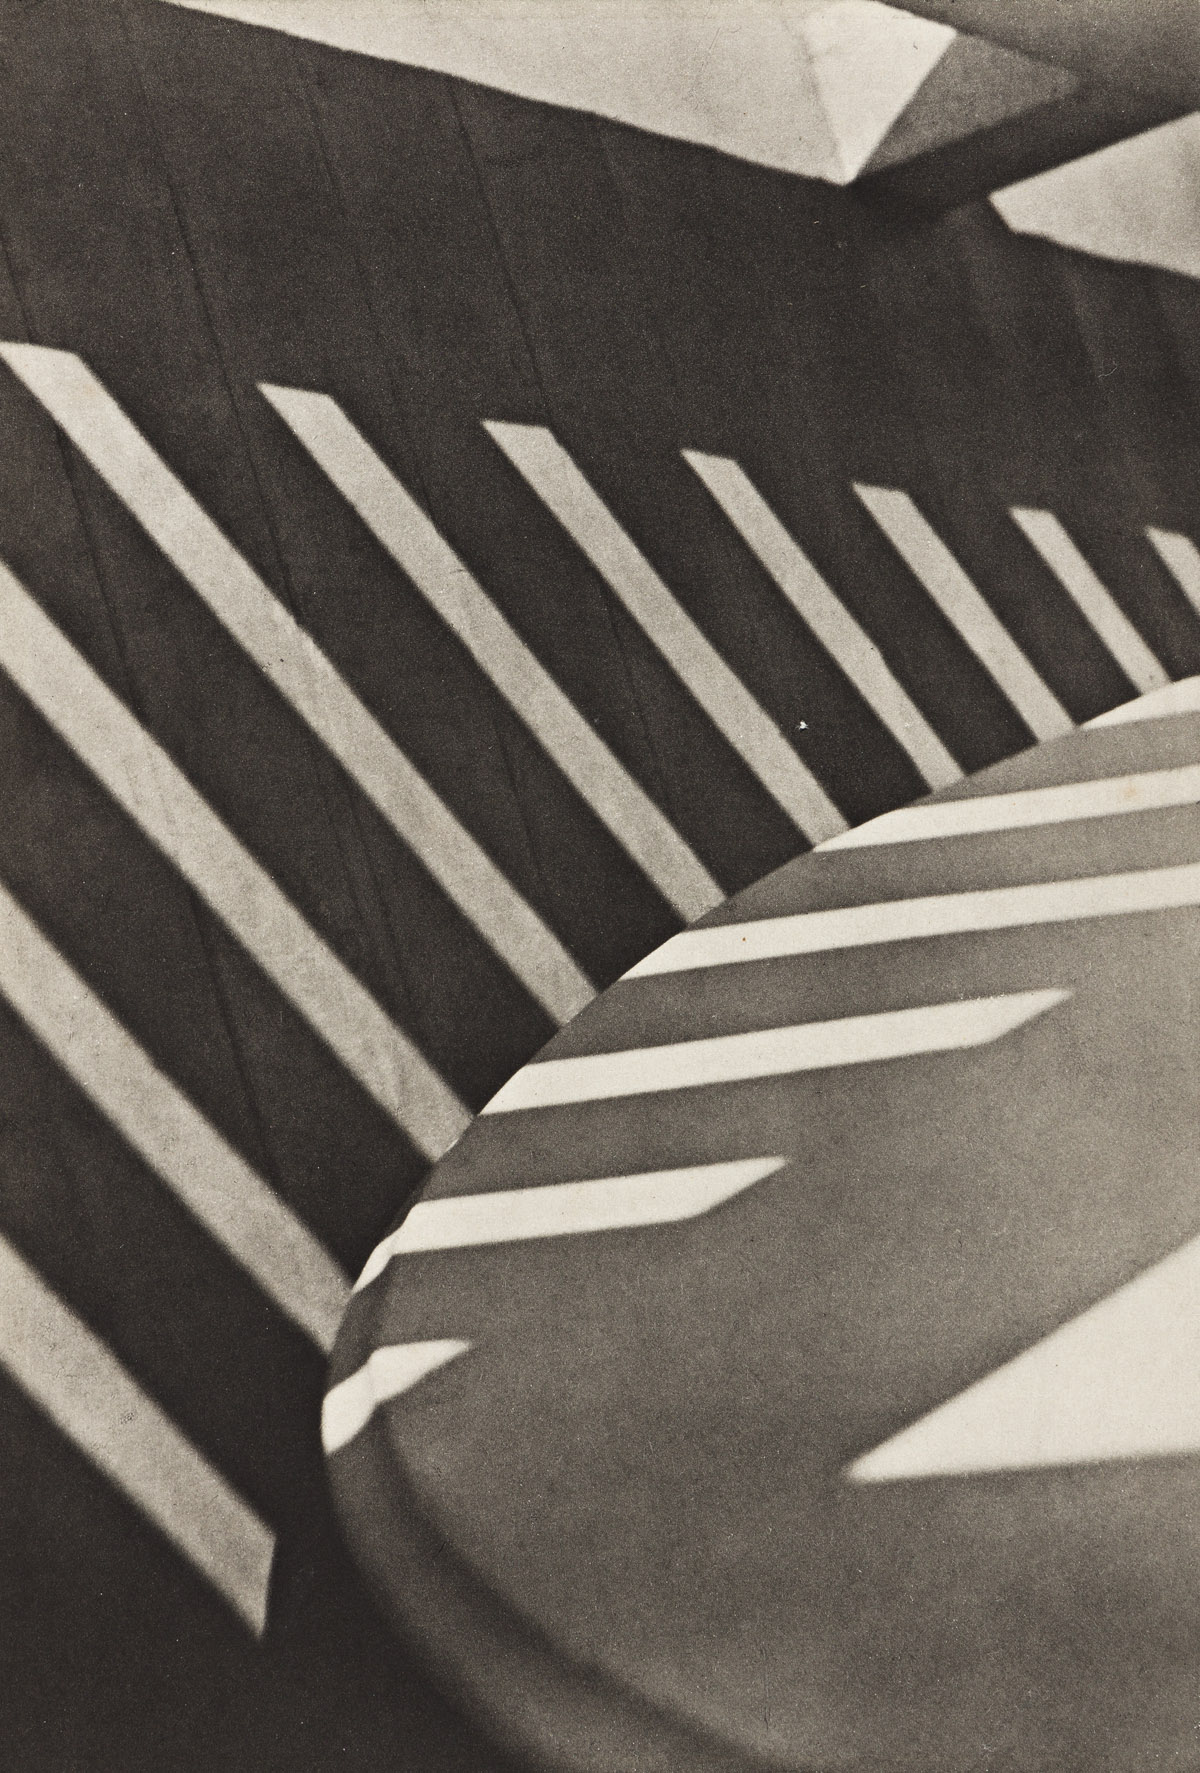 PAUL STRAND (1890-1976) Abstraction, Porch Shadows, from Camera Work Number 49-50.